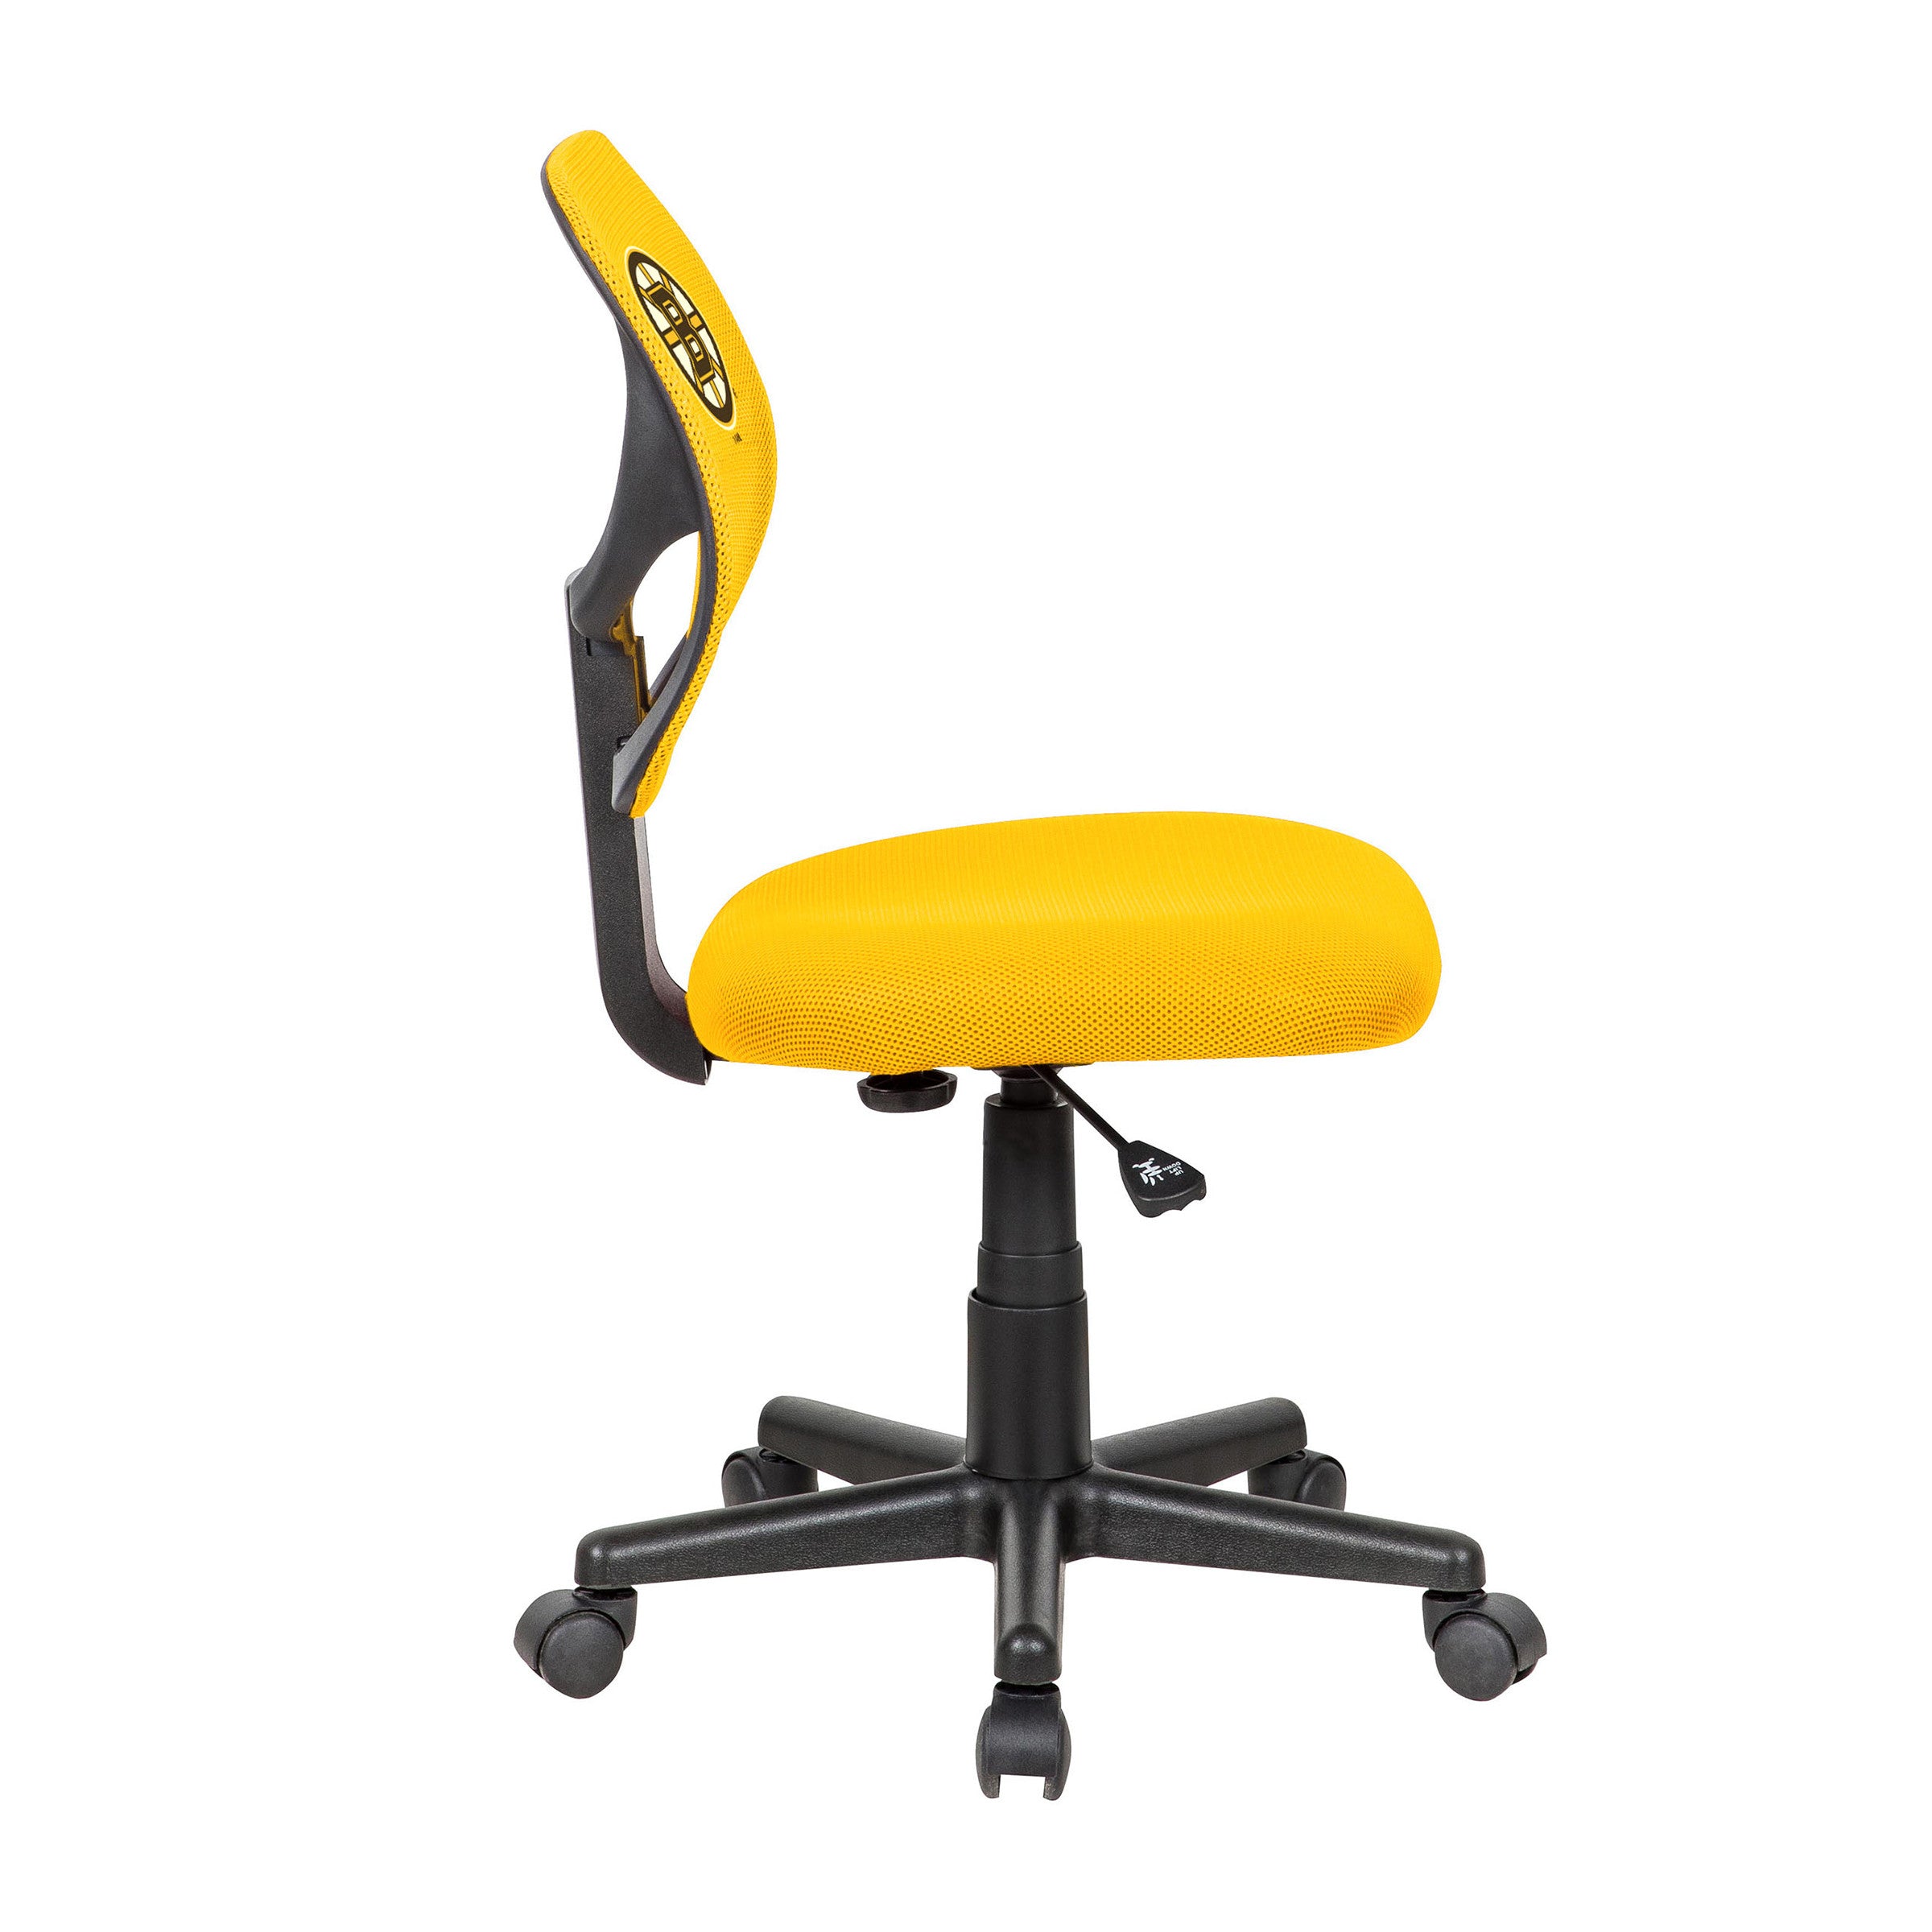 Imperial Boston Bruins Yellow Task Chair